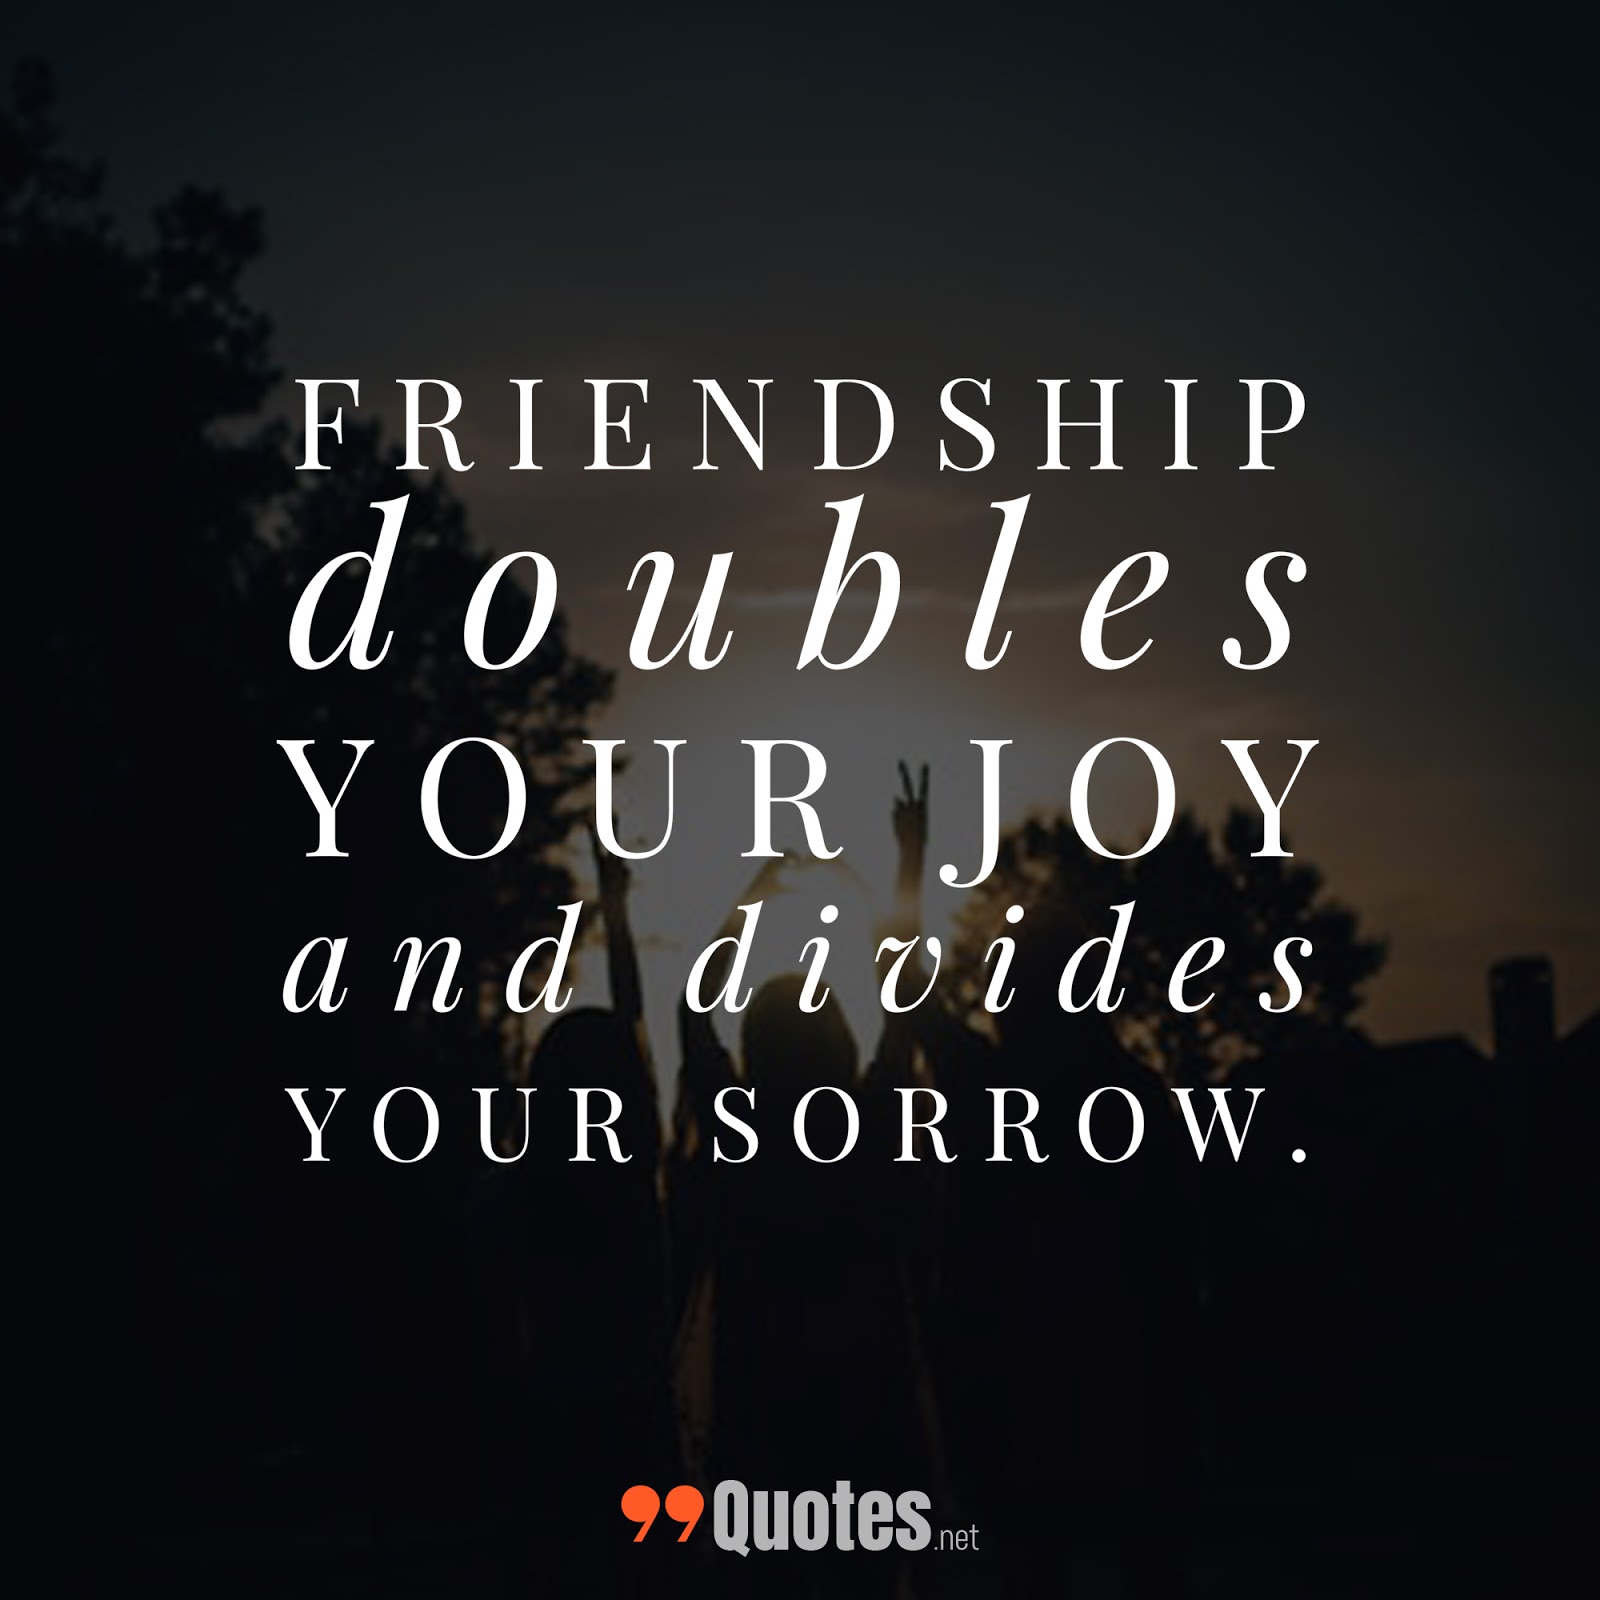 99 Cute  Short  Friendship Quotes  You Will Love with images 